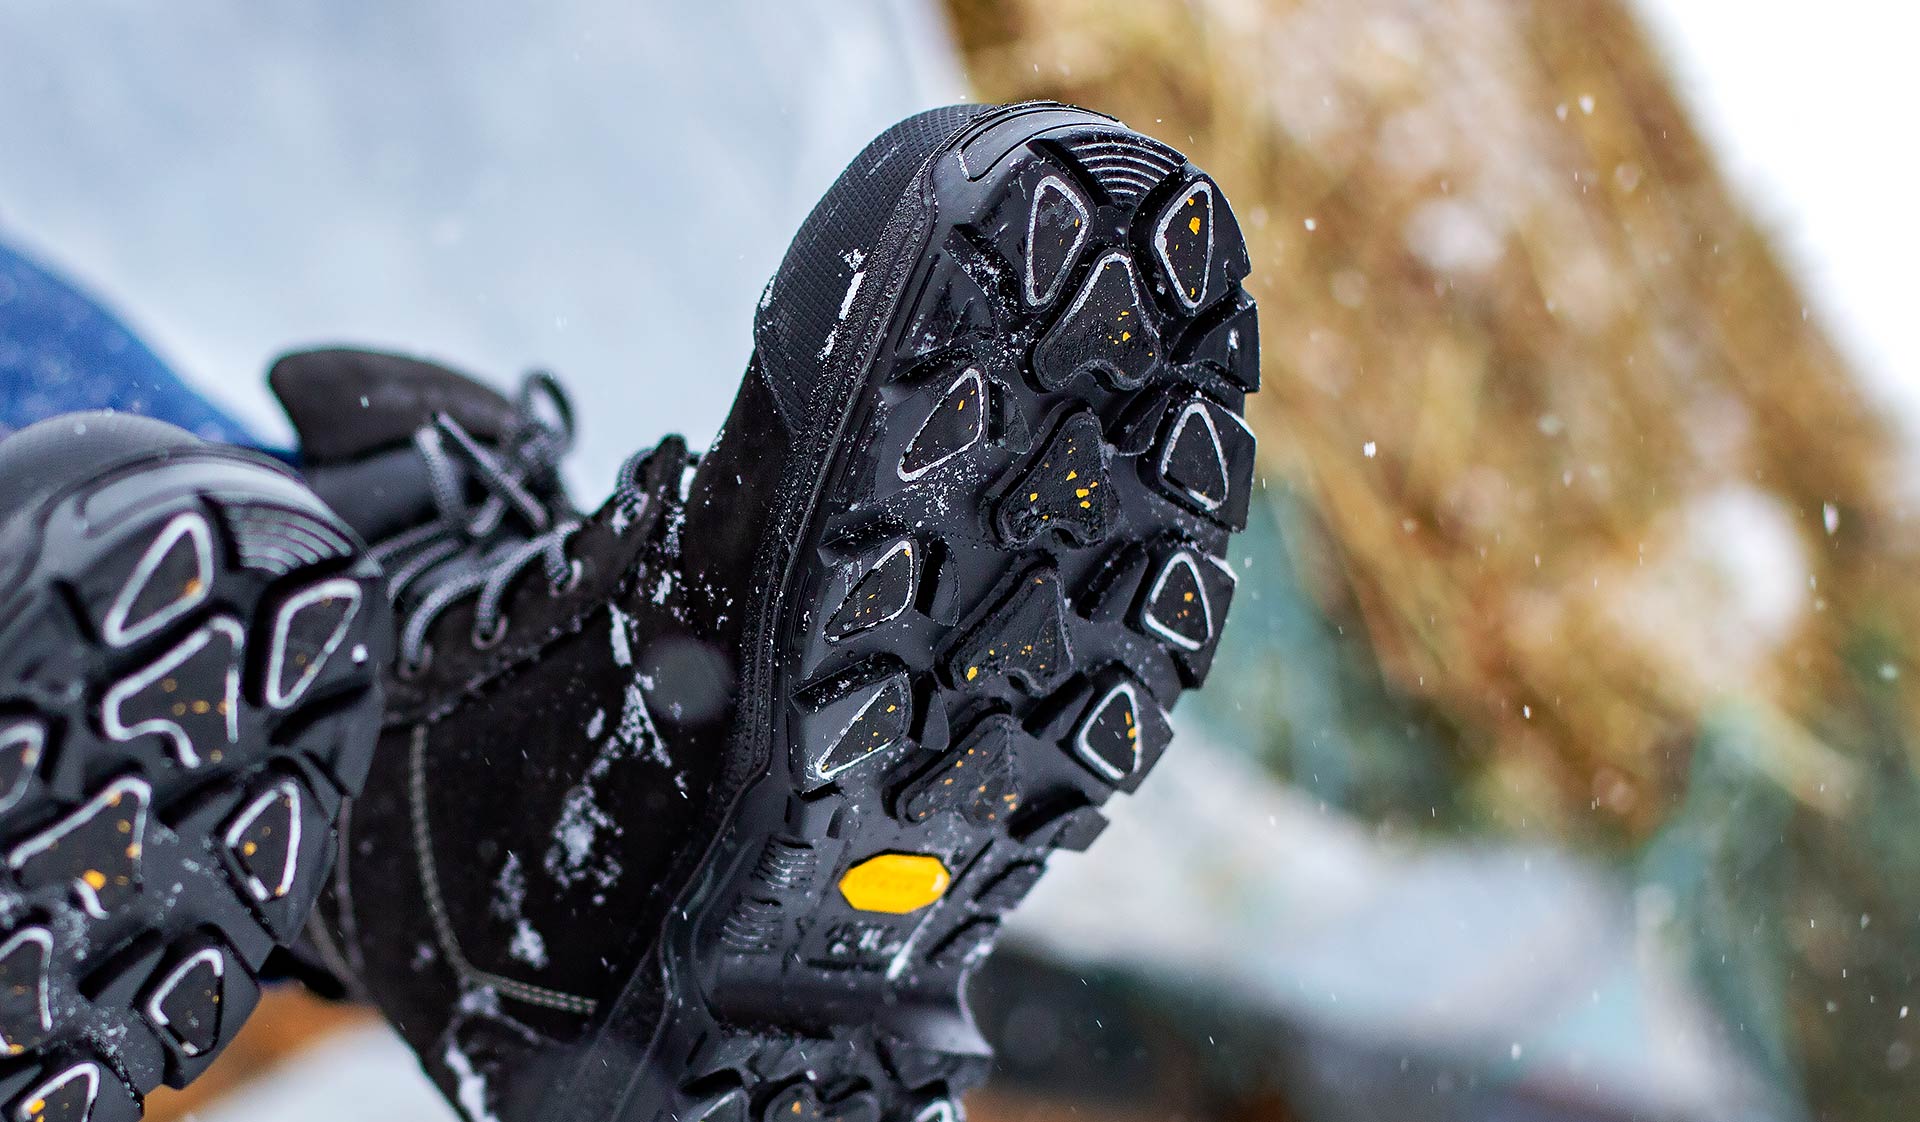 Vibram Arctic Grip Sole Review, No-Slip Boots 'Stick' To Ice